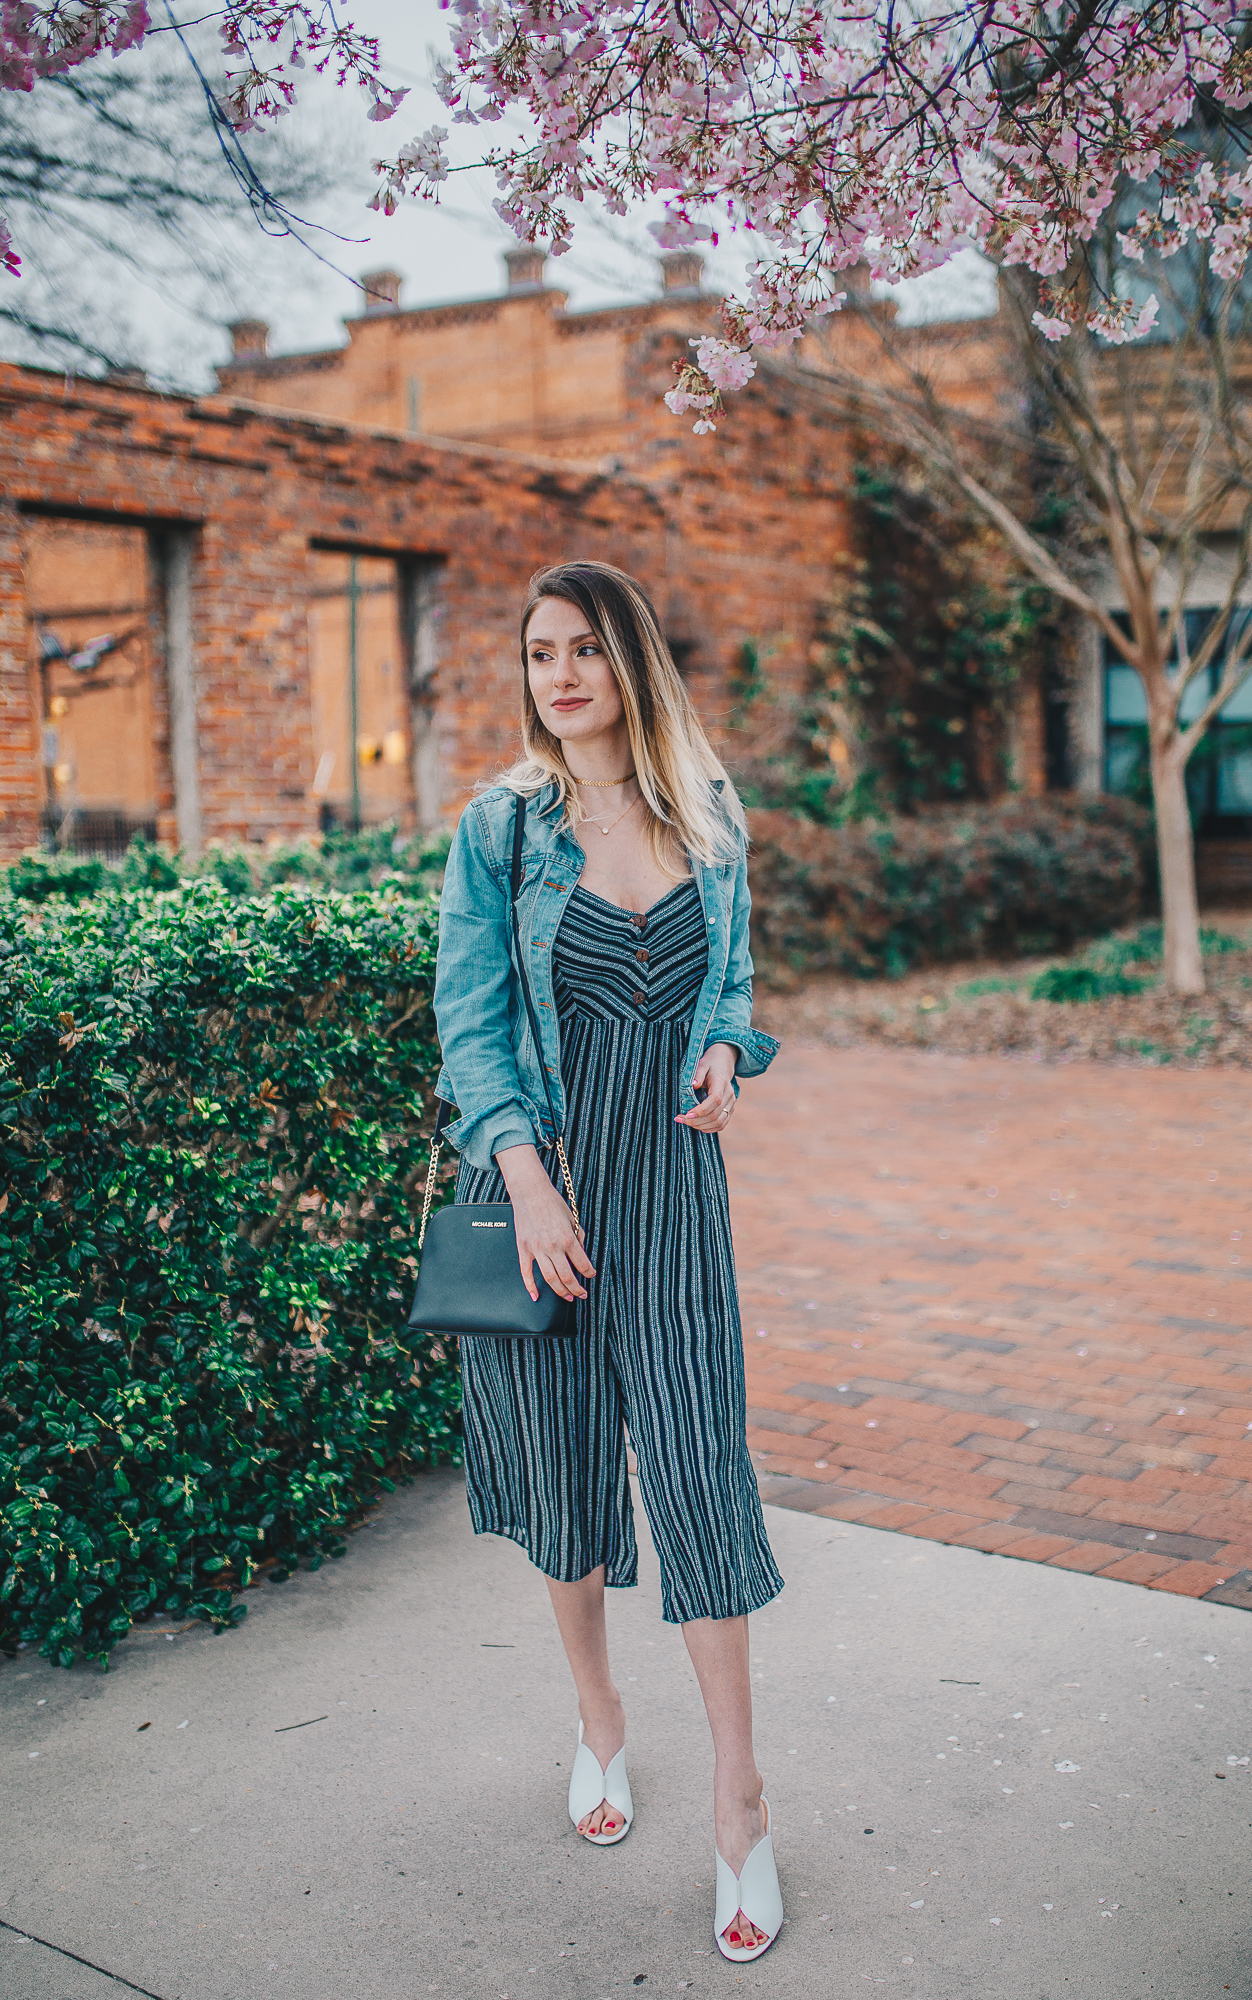 How To Style A Jumpsuit by North Carolina fashion and lifestyle blogger Jessica Linn. Navy blue chevron culotte jumpsuit from Forever21 worn with a denim jacket, white heeled mules from Target Who What Wear, a black Michael Kors Purse from Macy's, a gold chevron choker form Cary NC jewelry store CY Design Studio, and necklace from Copper Bloom. A casual and effortless summer outfit.